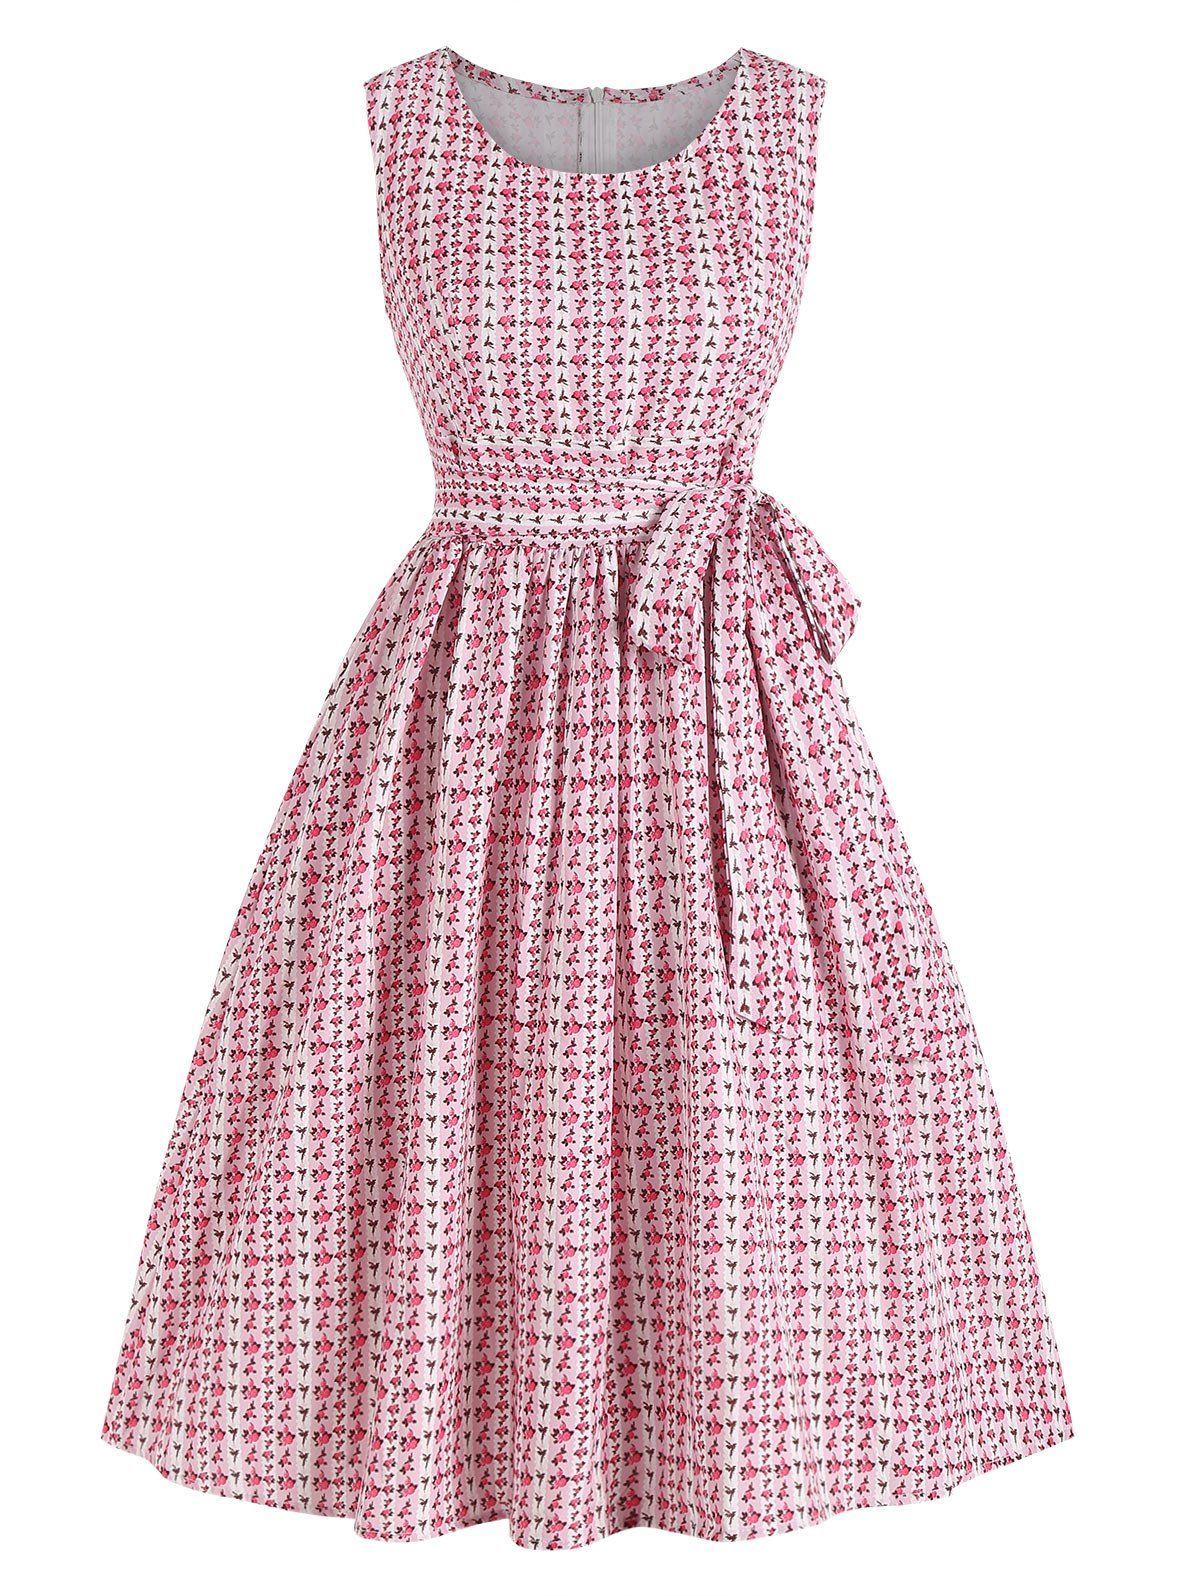 Belted Sleeveless Ditsy Floral Swing Dress - LIGHT PINK S